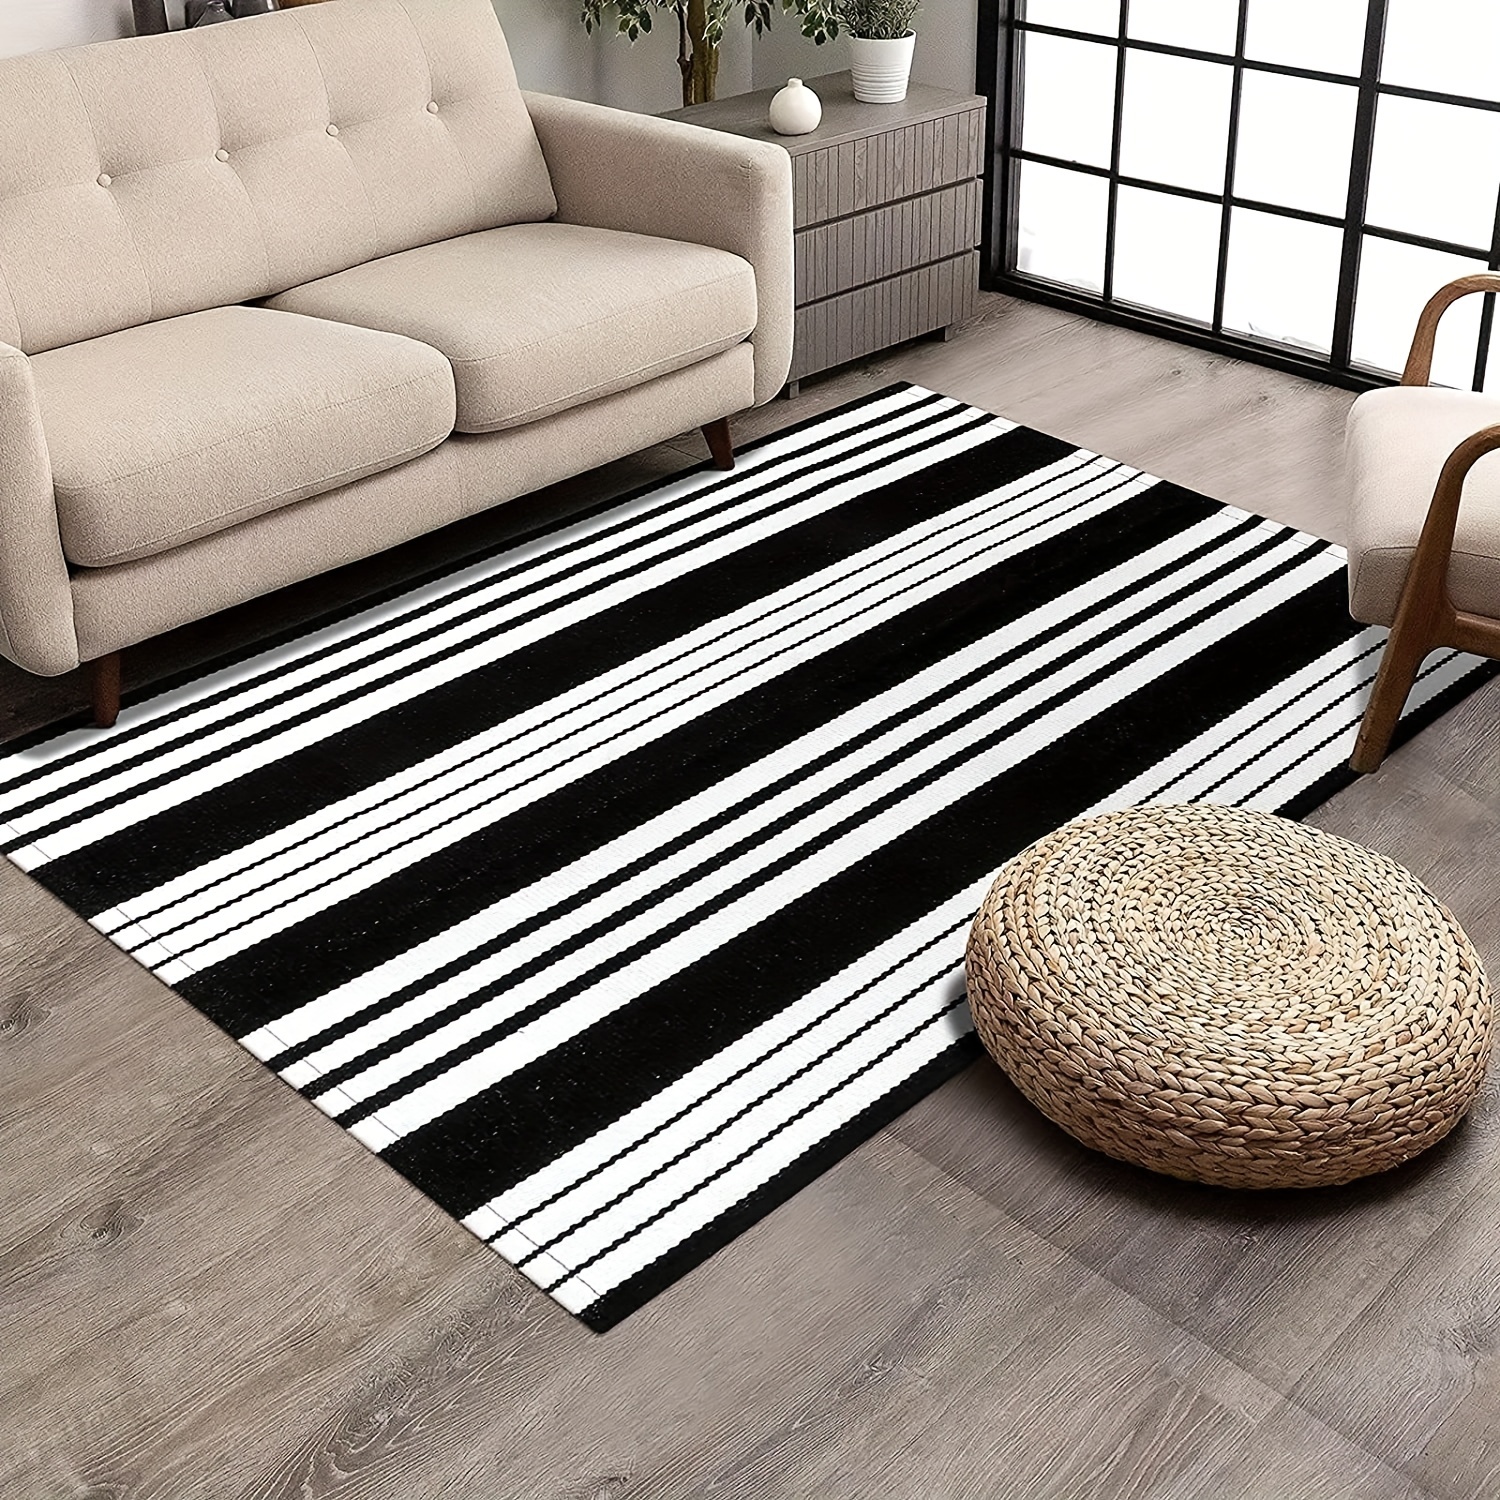 Bottalive Black and White Striped Area Rug 275 x 43 Front Porch Rug Cotton Hand-Woven Outdoor Rug for Layered Door Matsfarmhouseentry Waywelcome Door